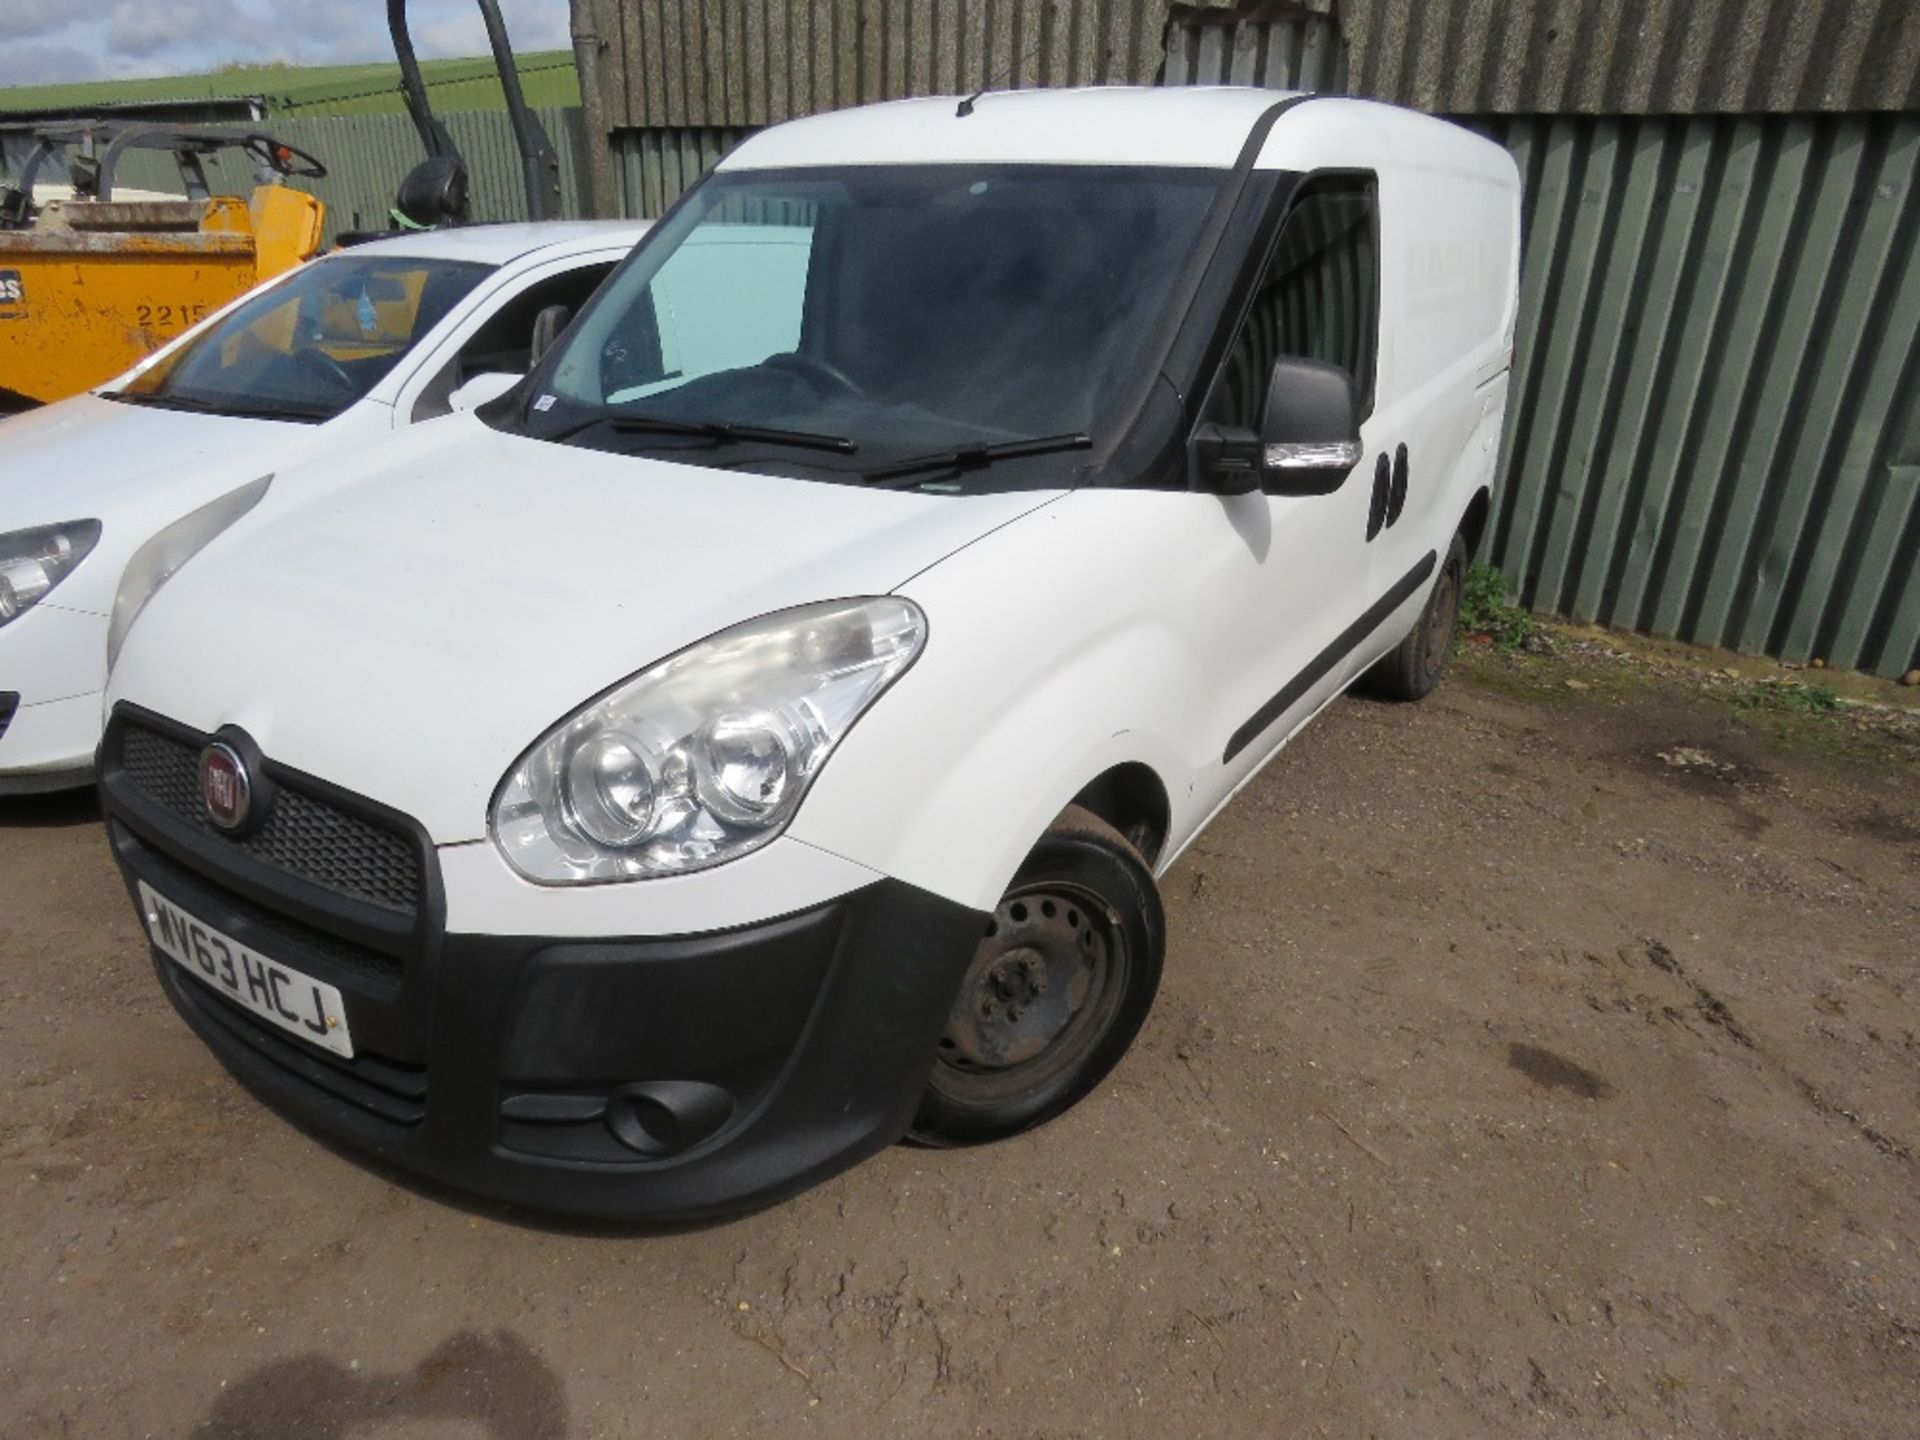 FIAT DOBLO PANEL VAN REG: WV63 HCJ. 84343 REC MILES. WHEN TESTED WAS SEEN TO DRIVE, STEER AND BRAKE. - Image 3 of 12